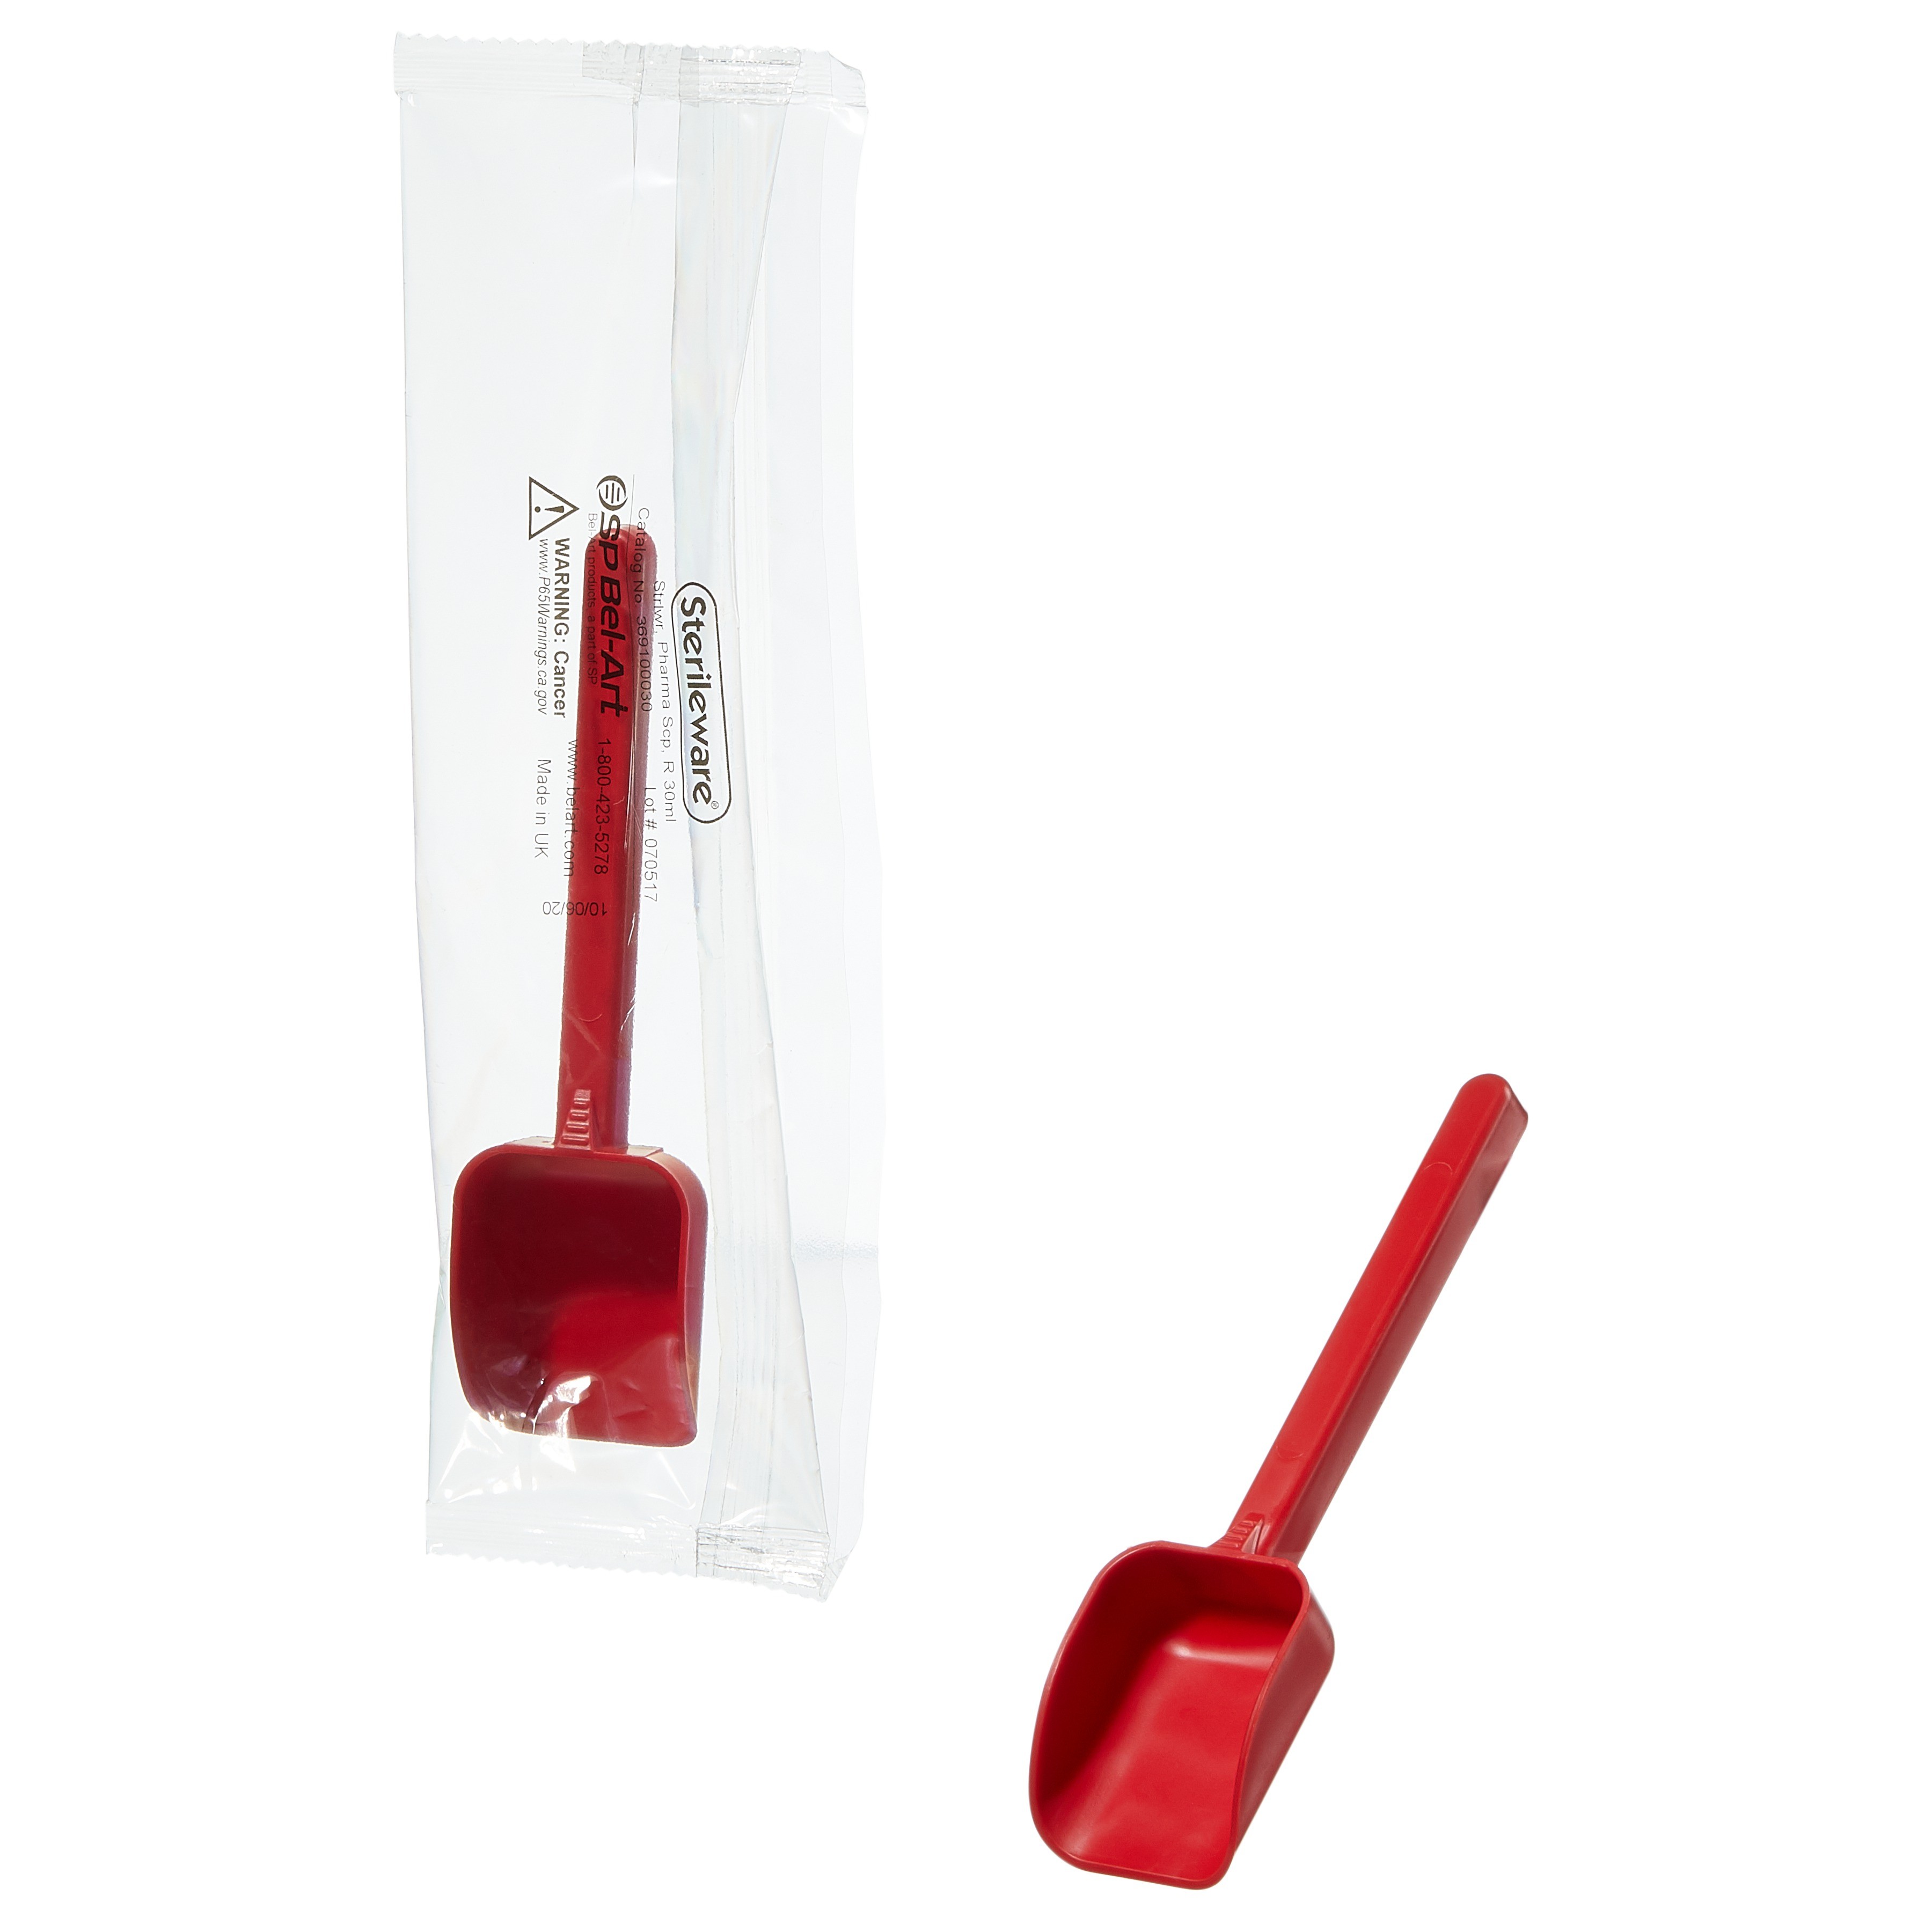 Sterileware Pharma Scoops - Red; 30ml (1oz), Individually Wrapped (Pack of 100)